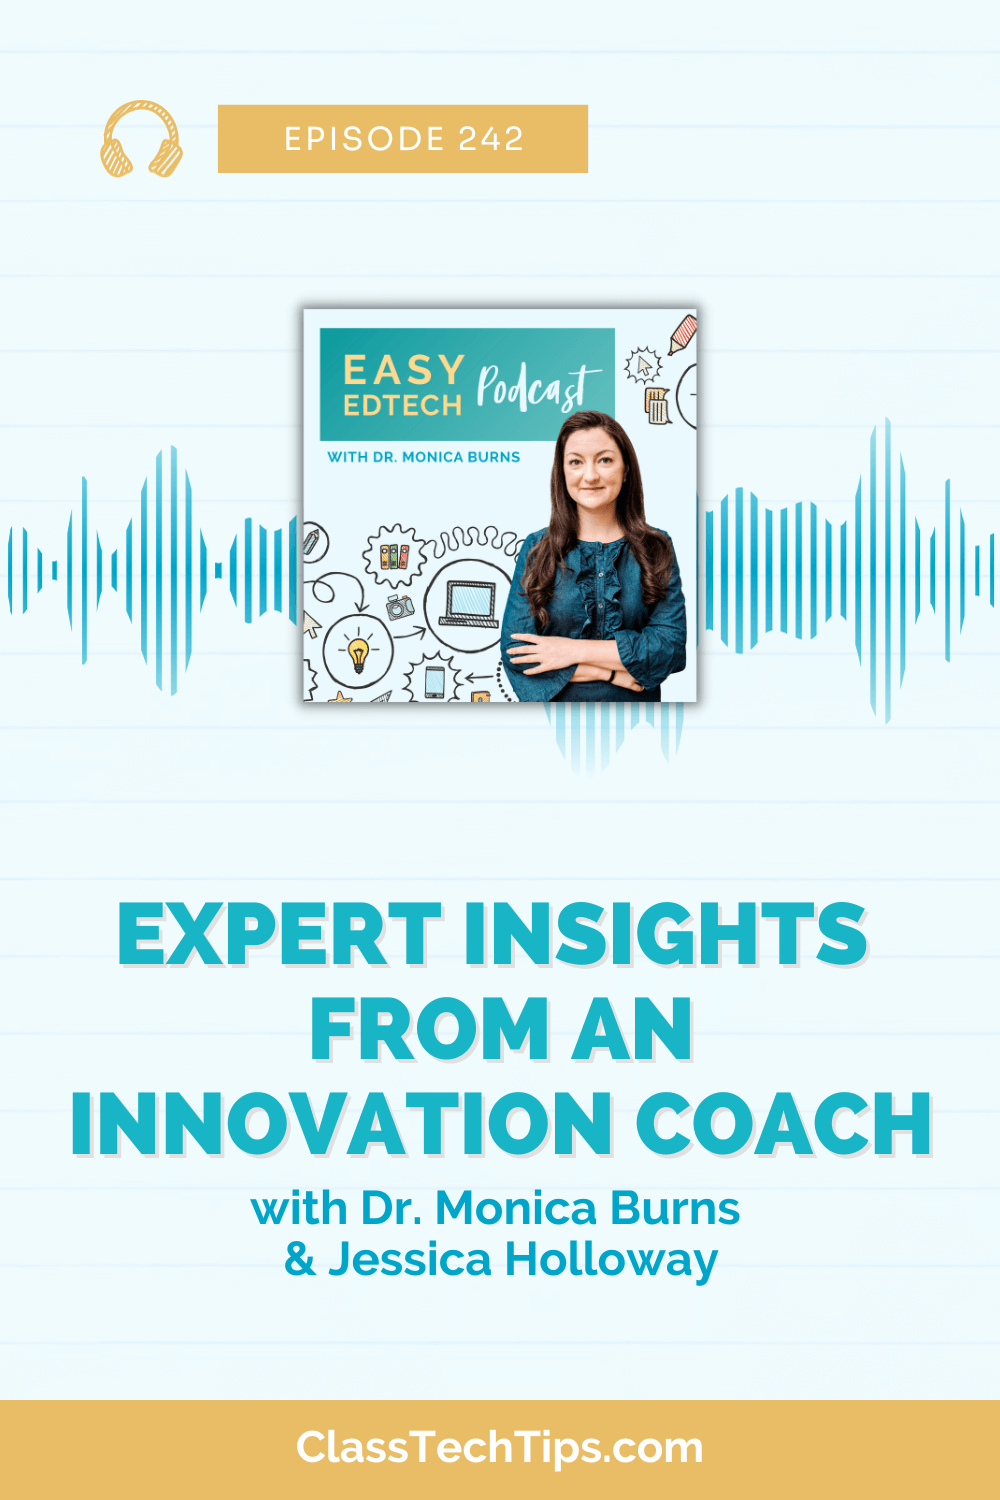 Podcast episode graphic featuring the logo, with a spotlight on Innovation Coach Jessica Holloway discussing PBL, STEM, and EdTech integration in education.